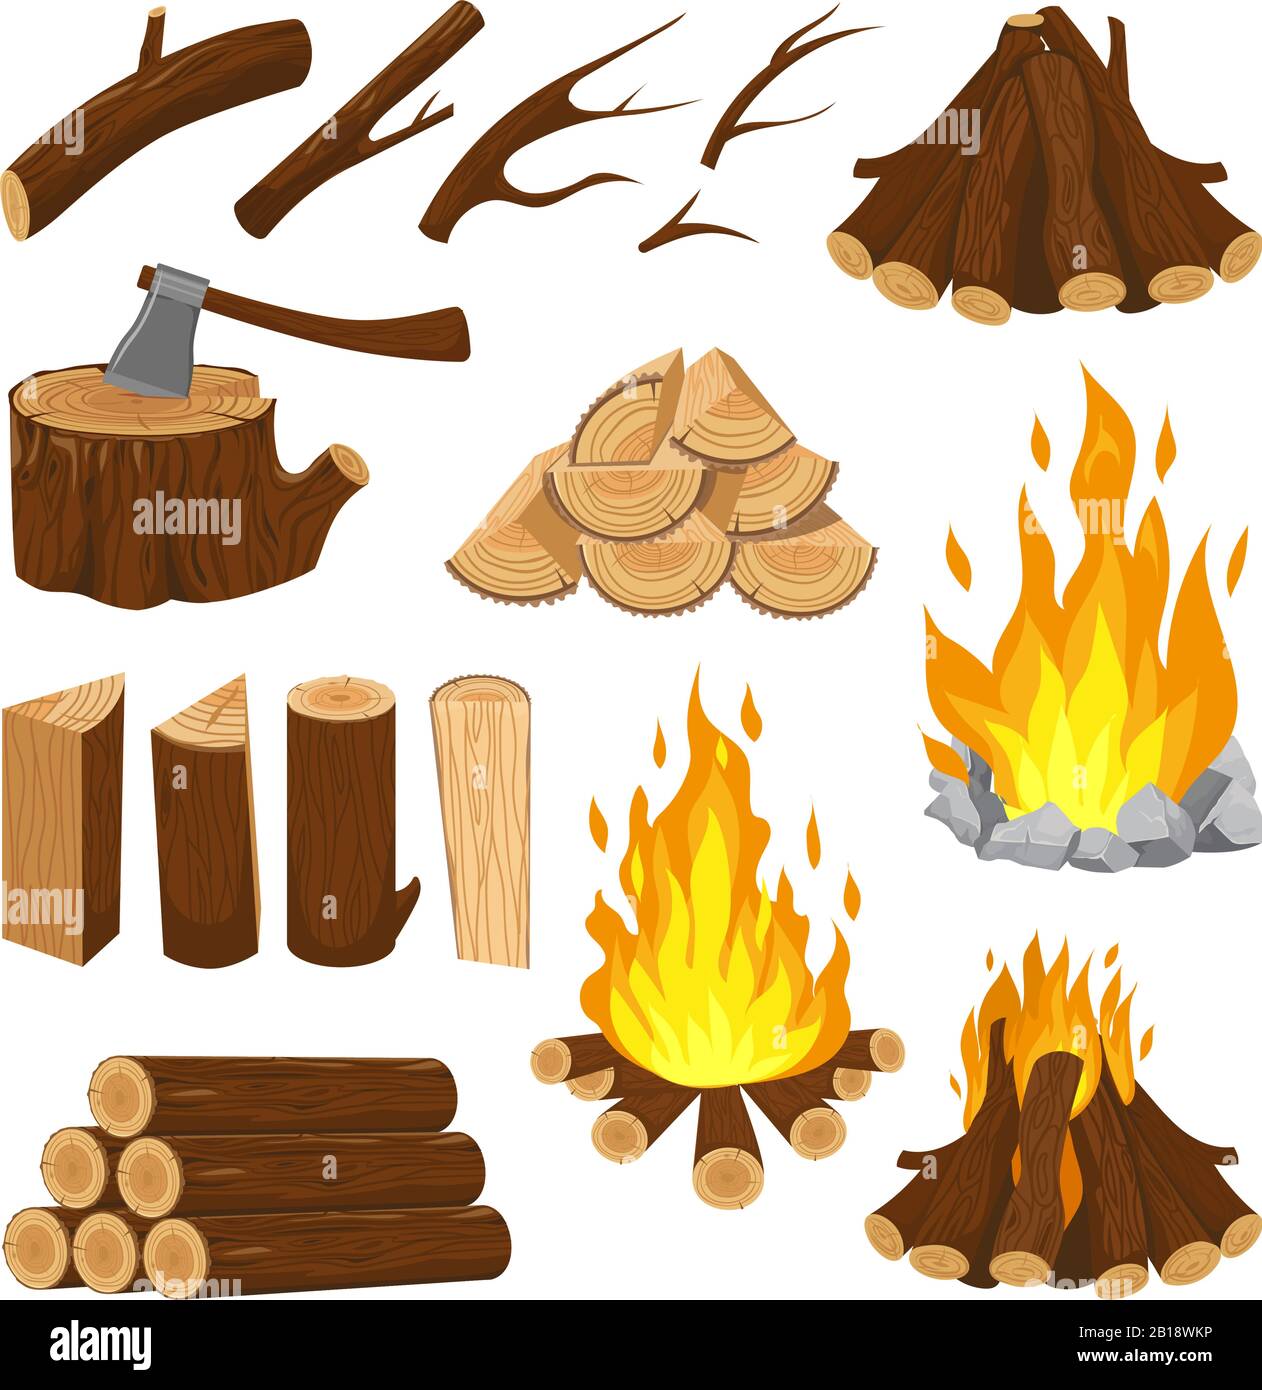 Firewood boards. Fireplace fire wood, burning wooden stack and blazing bonfire. Campfire logging pile cartoon vector illustration Stock Vector